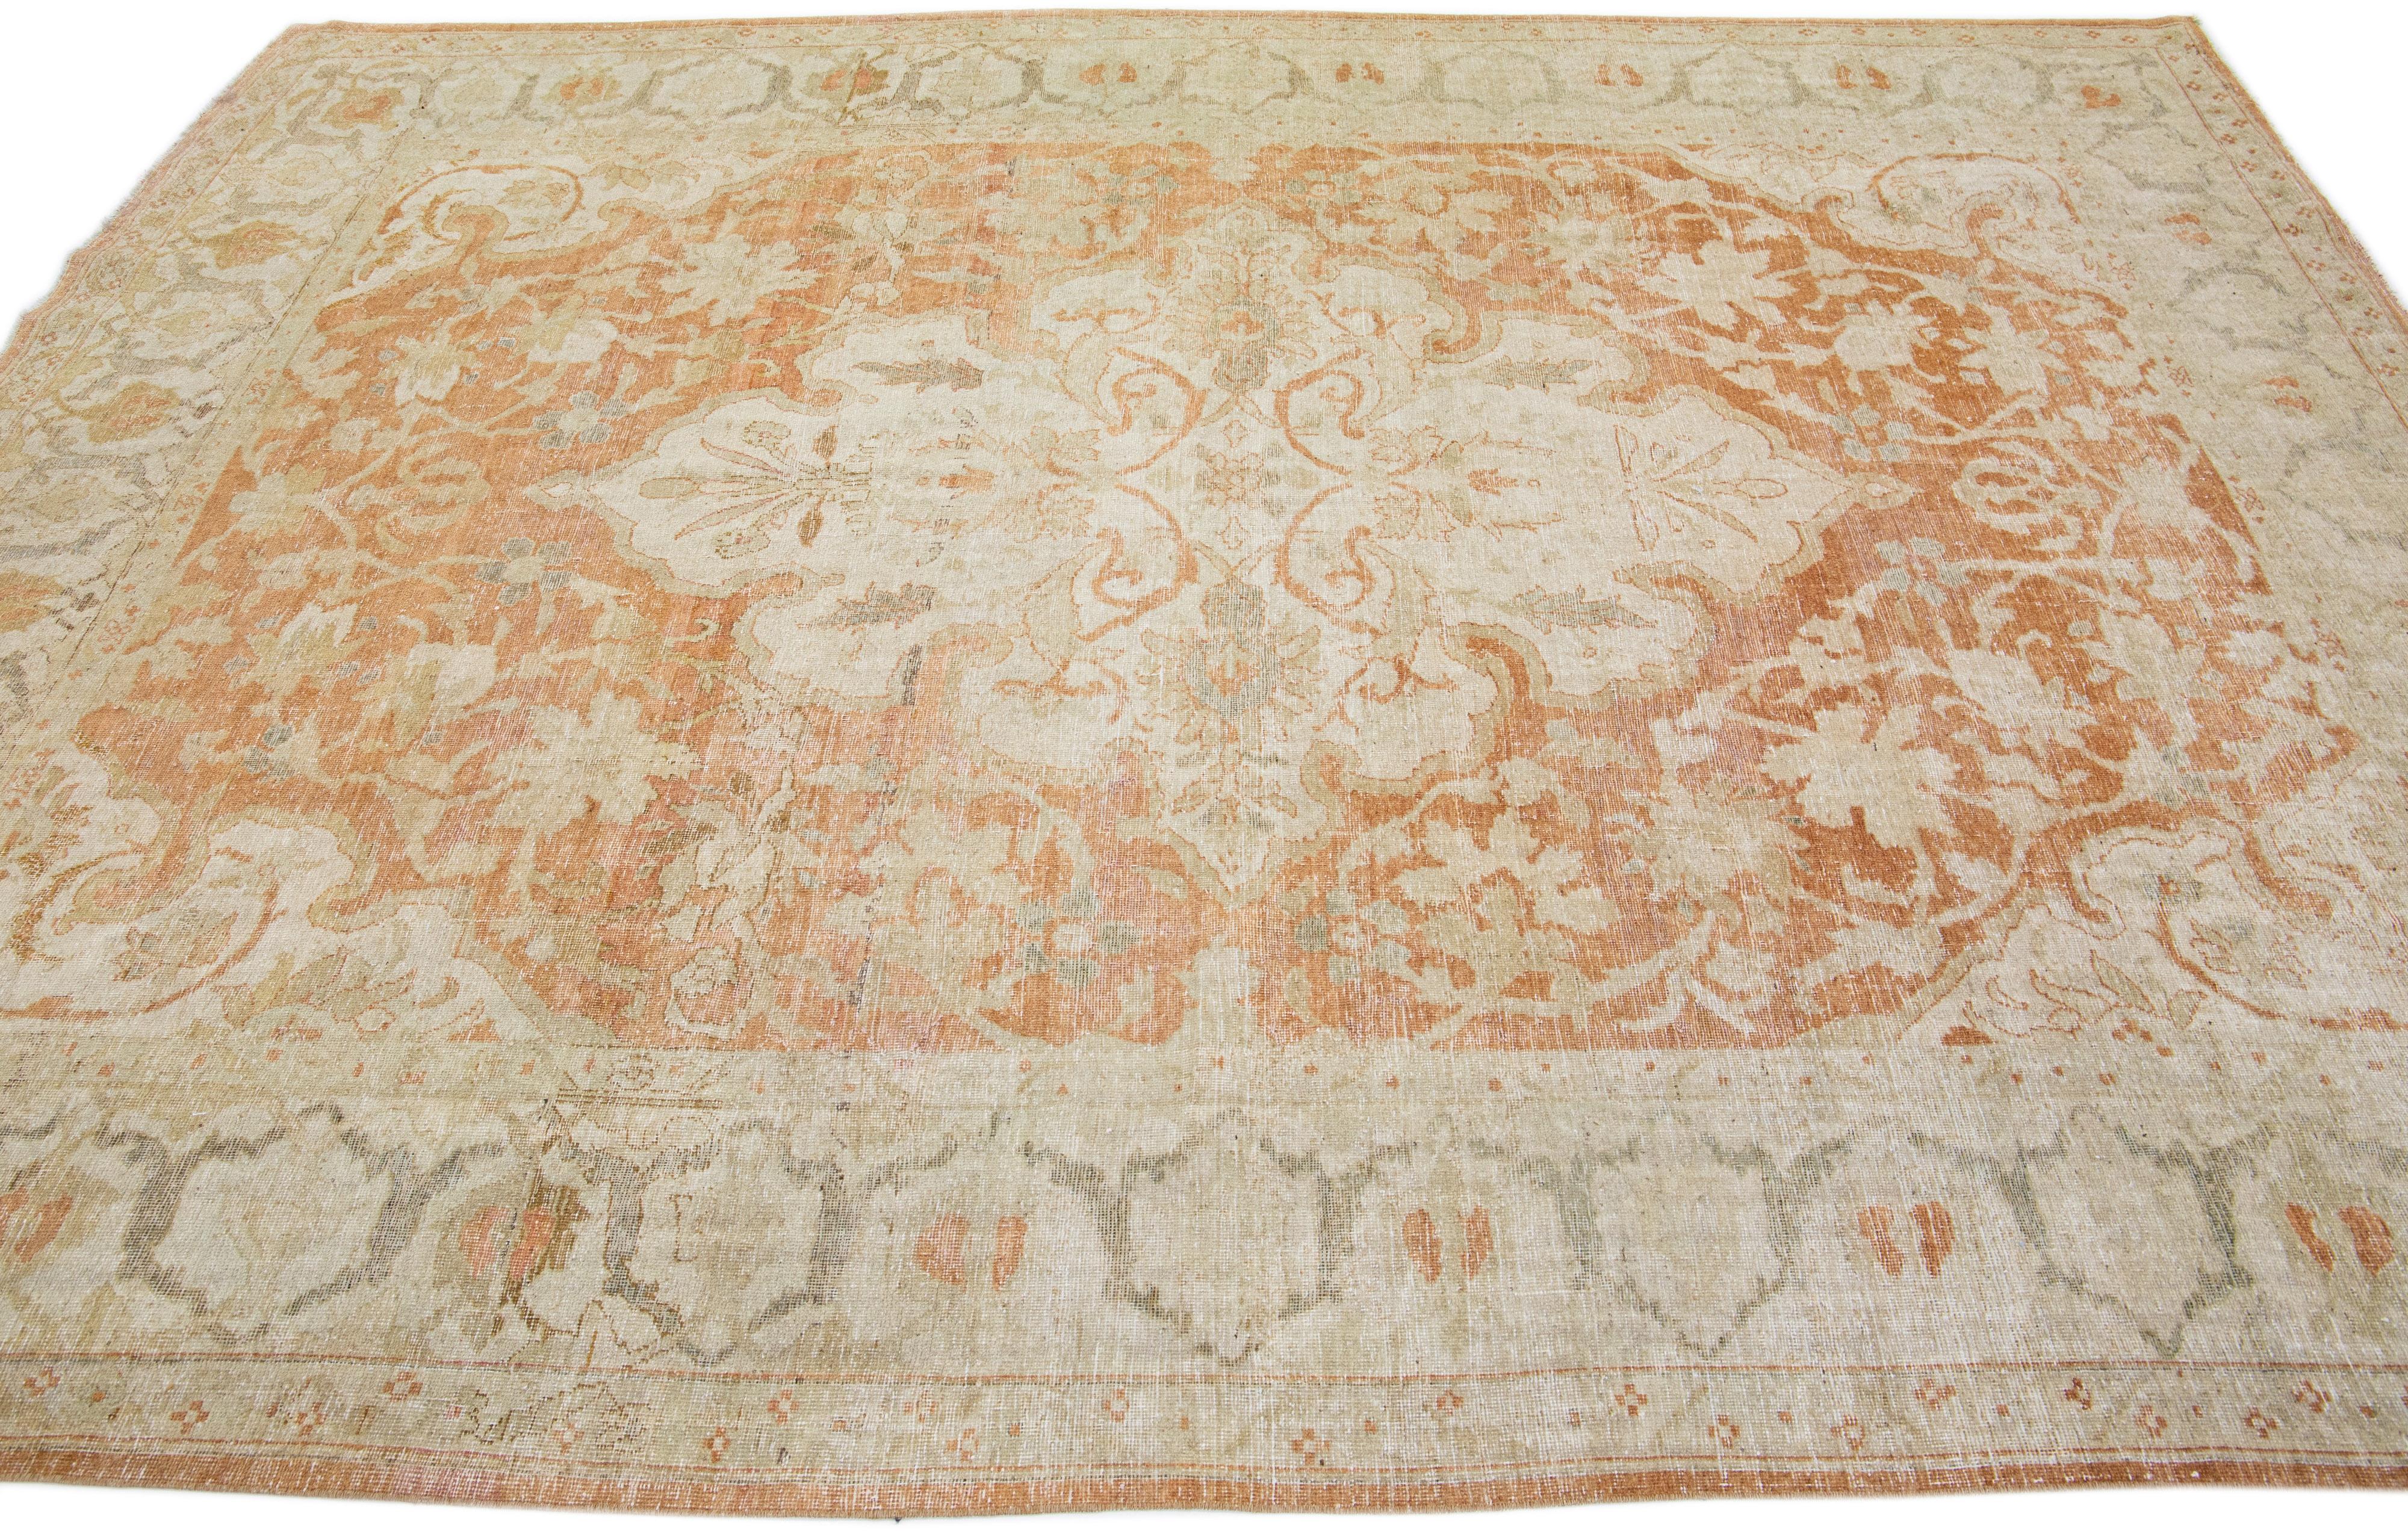 Rust 1900s Antique Indian Wool Agra Rug with Allover Design In Good Condition For Sale In Norwalk, CT